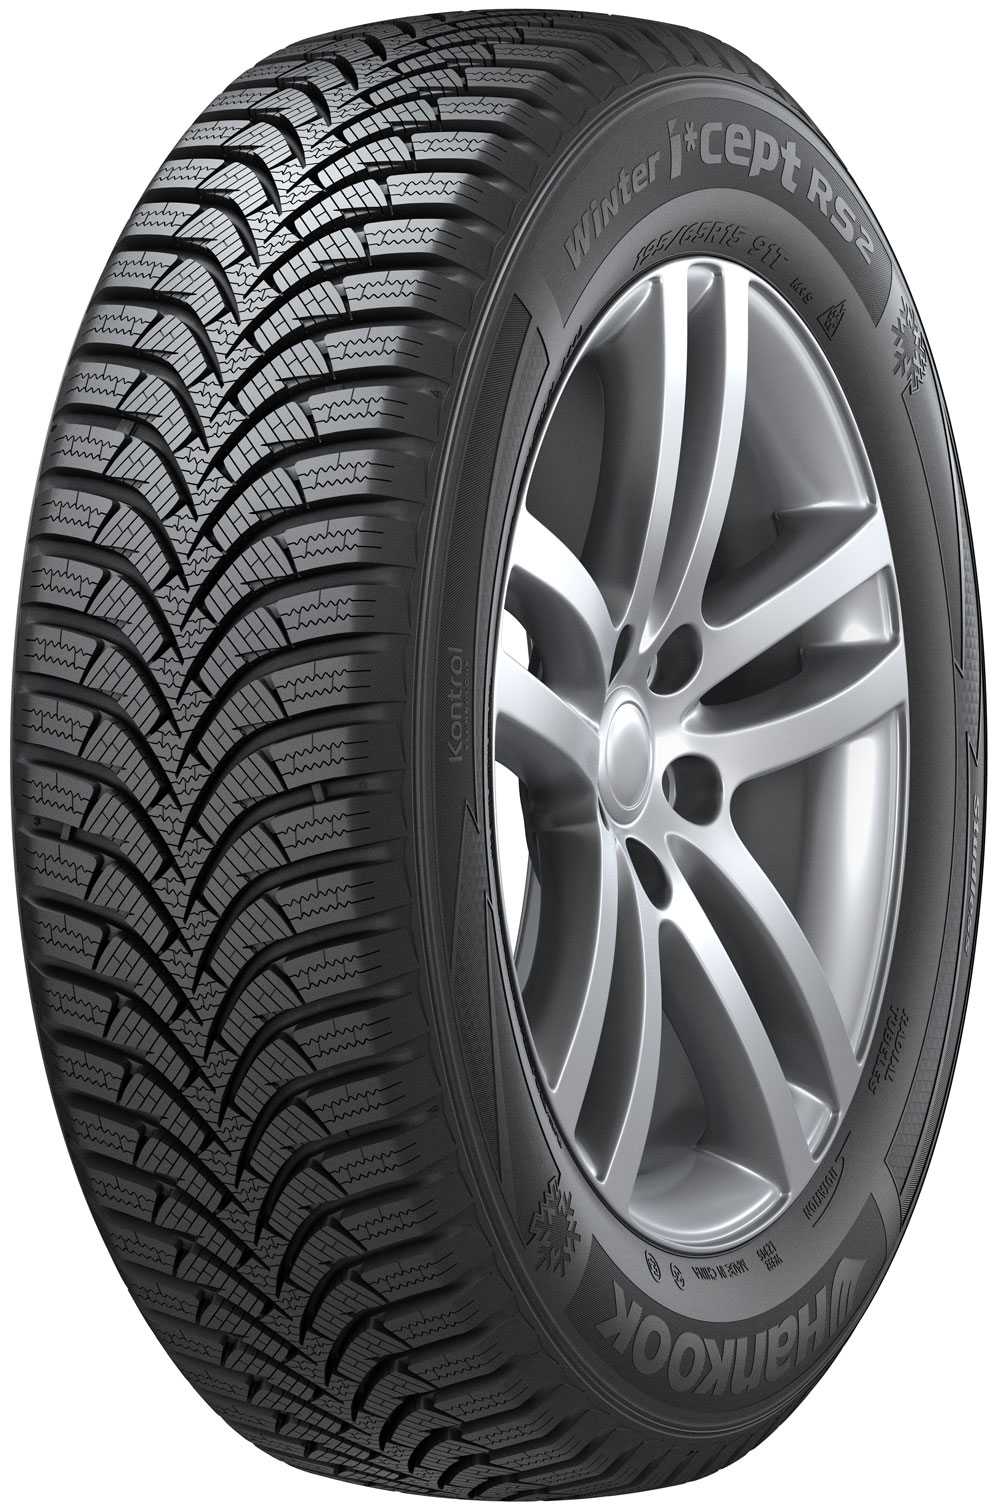 Anvelope auto HANKOOK icept RS 2 (W452) XL 185/55 R15 86H